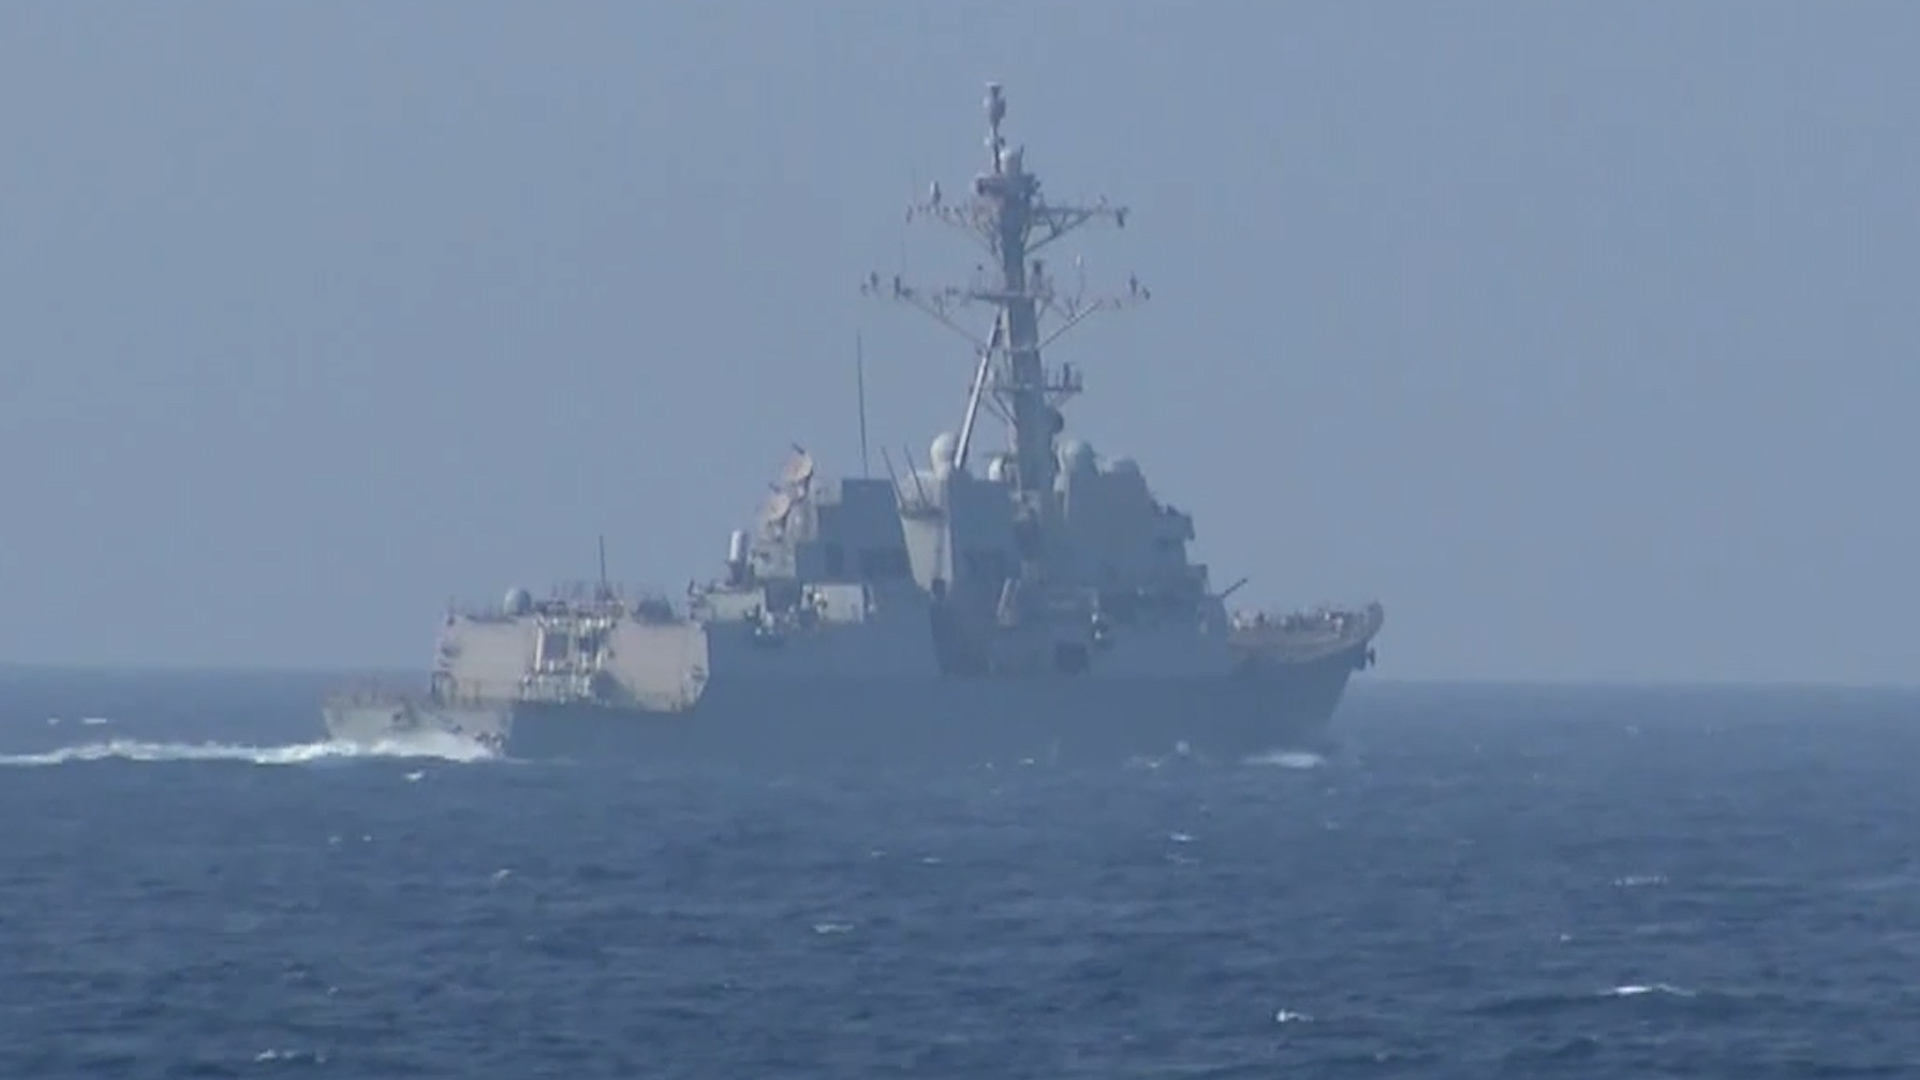 China nearly hitting U.S. warship is ‘clearly provocative’: ex-navy ...